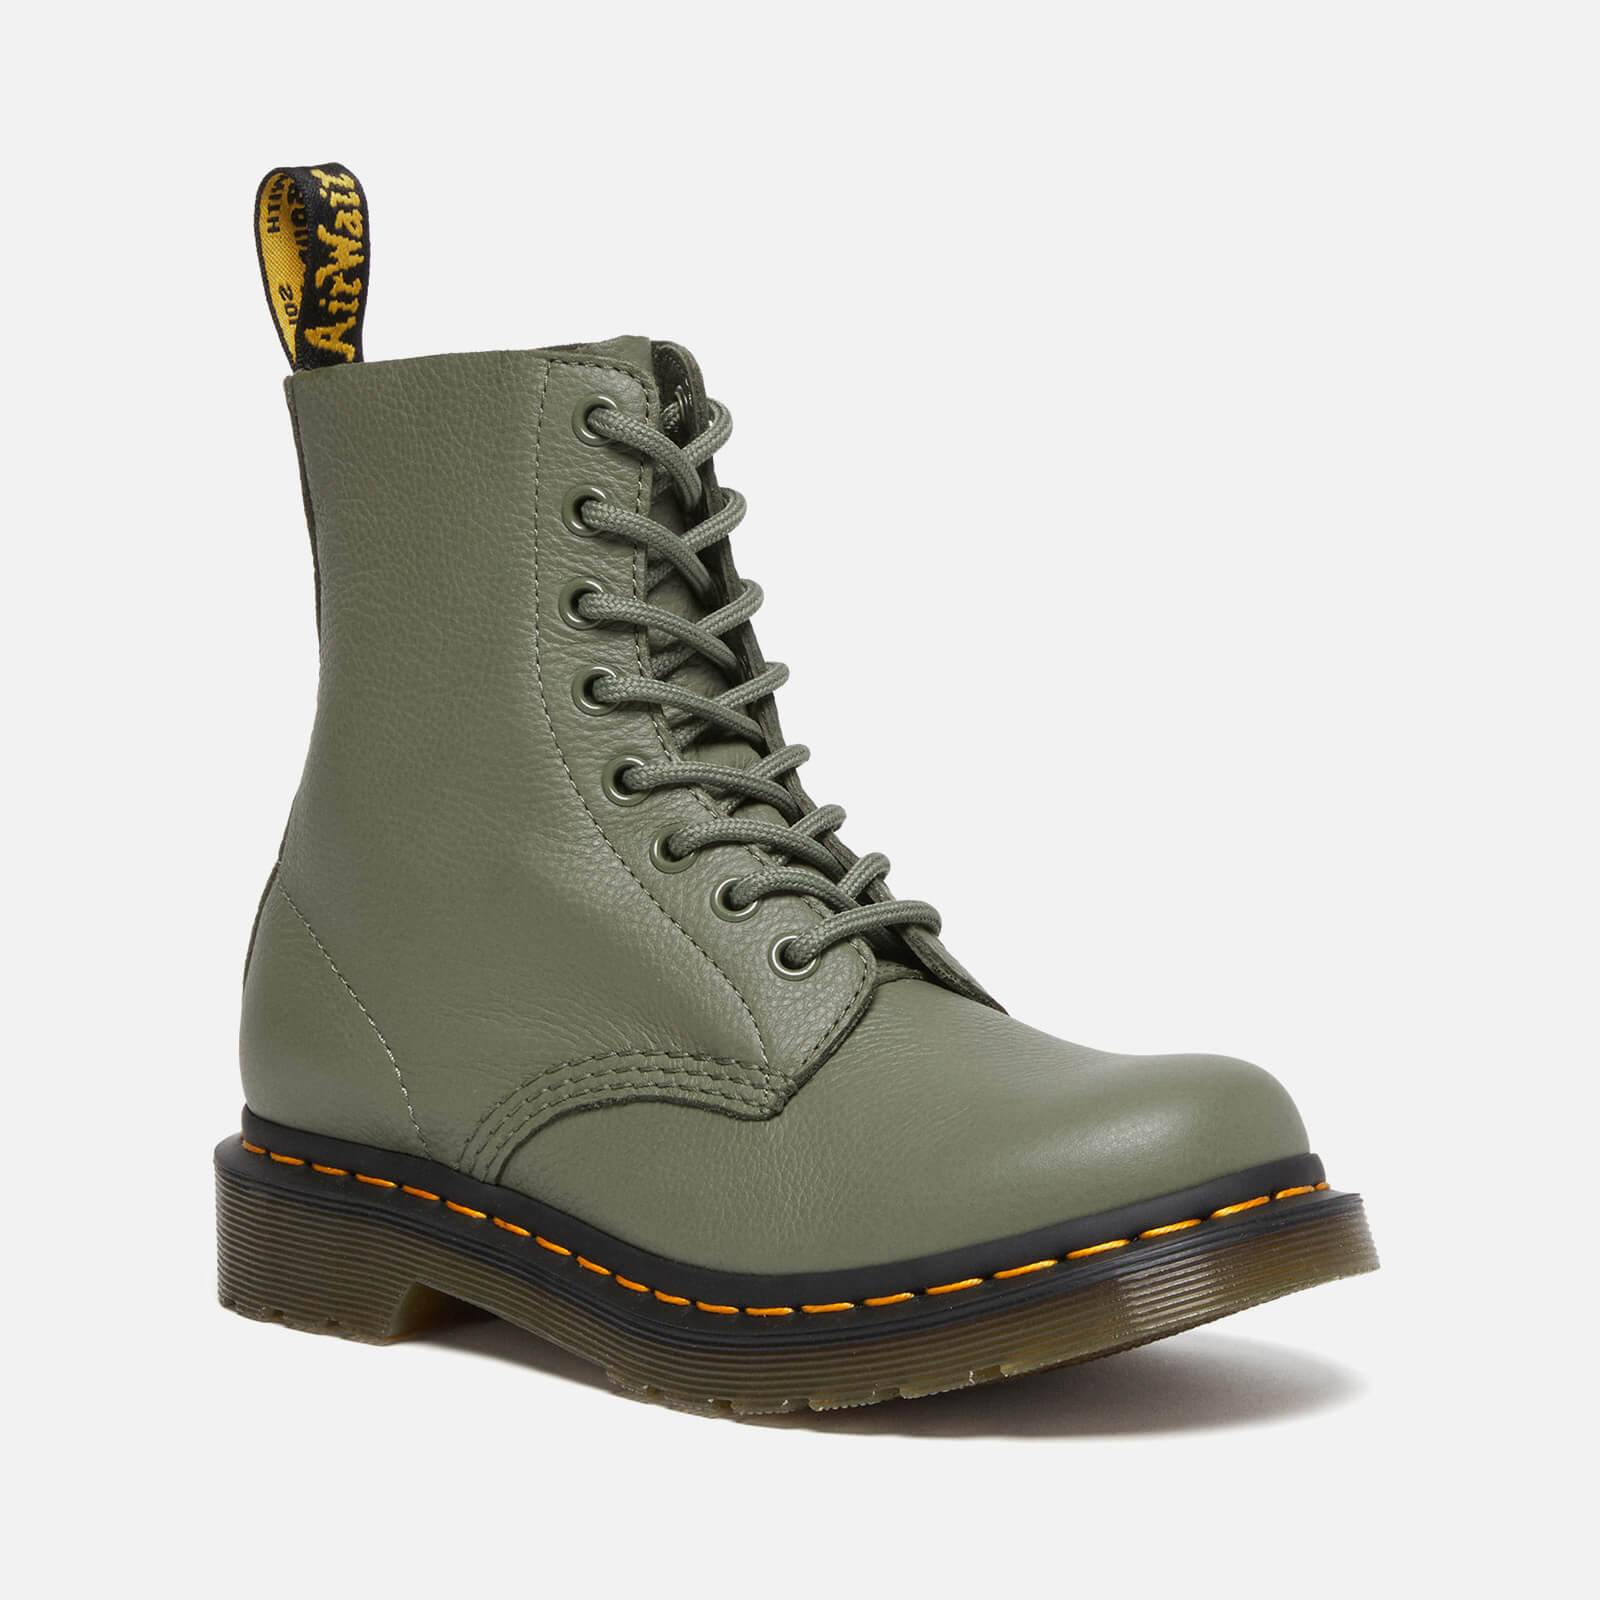 Dr. Martens 1460 Pascal Virginia Leather 8-Eye Boots - UK 4